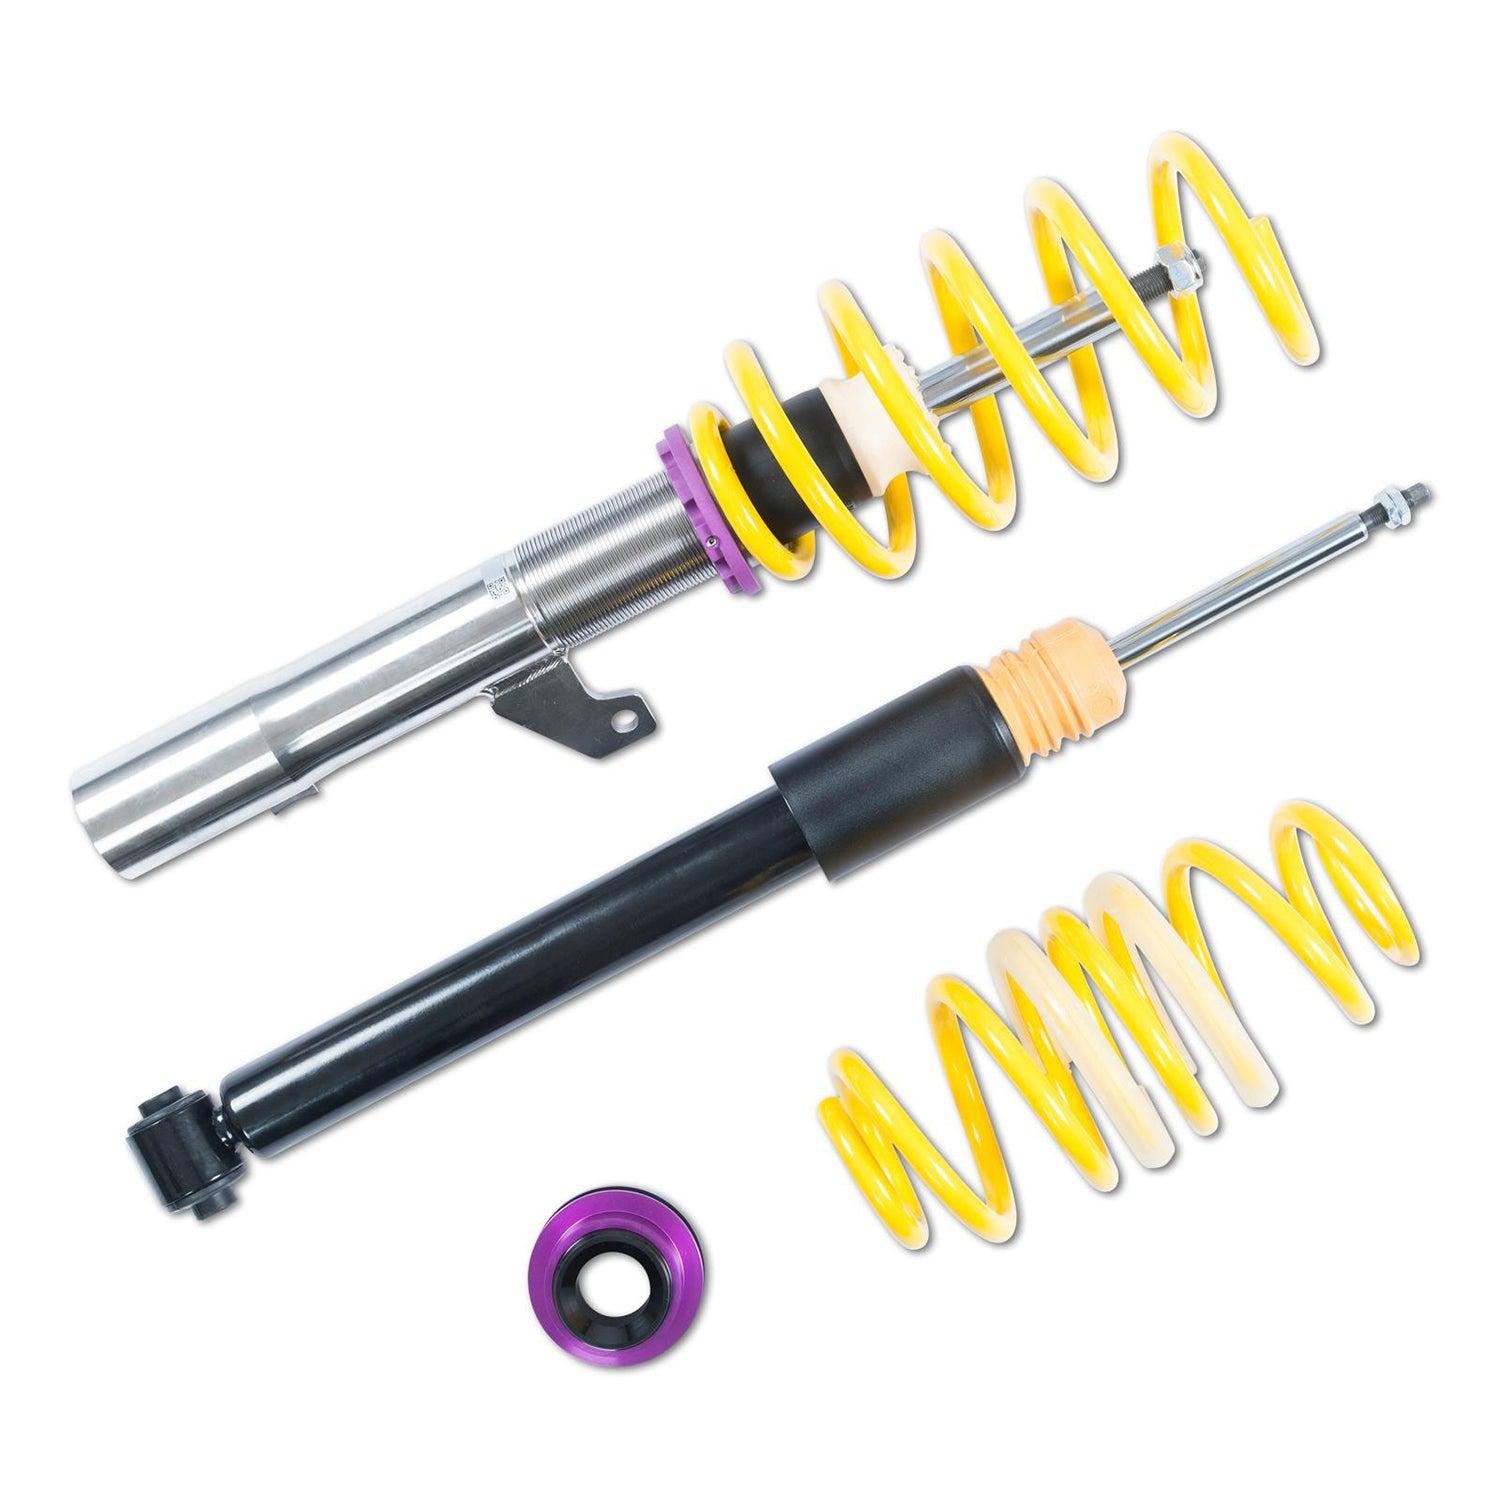 KW BMW 330d/316d V2 Coilover Kit (G20) with EDC Deactivation-R44 Performance